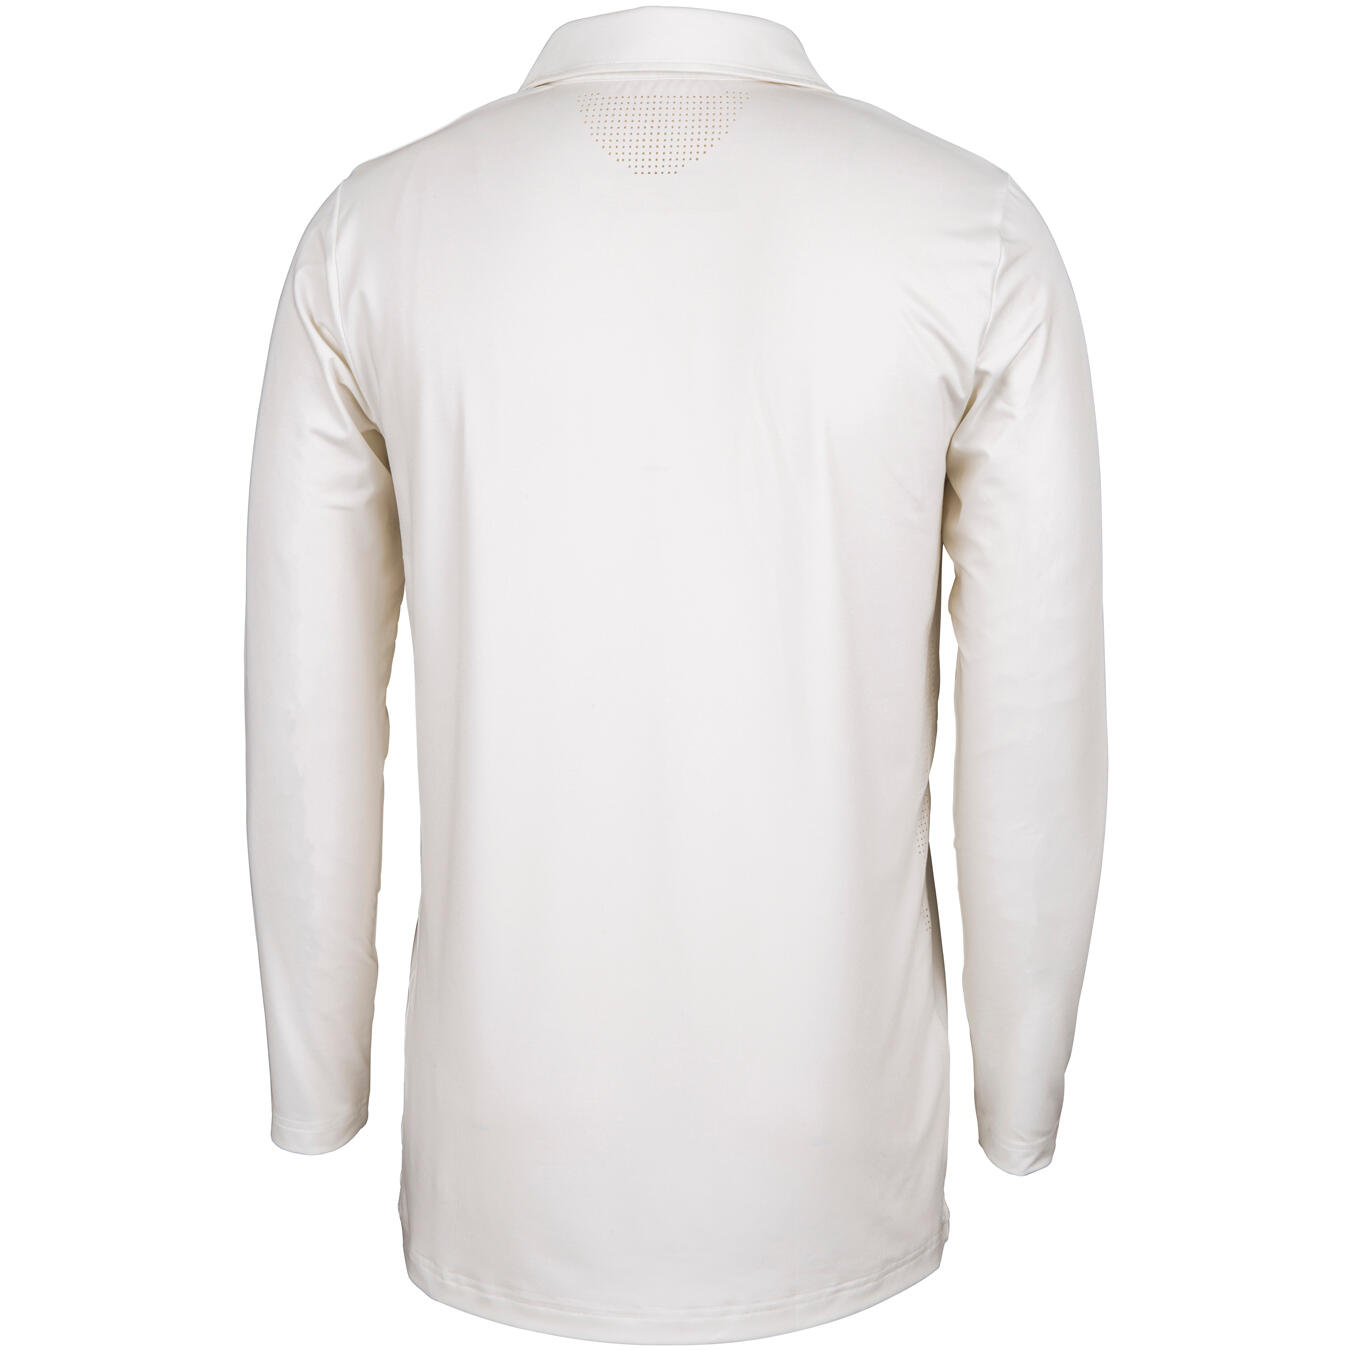 Pro Performance S/S Playing Shirt,Ivory/Maroon,Adult 1/1